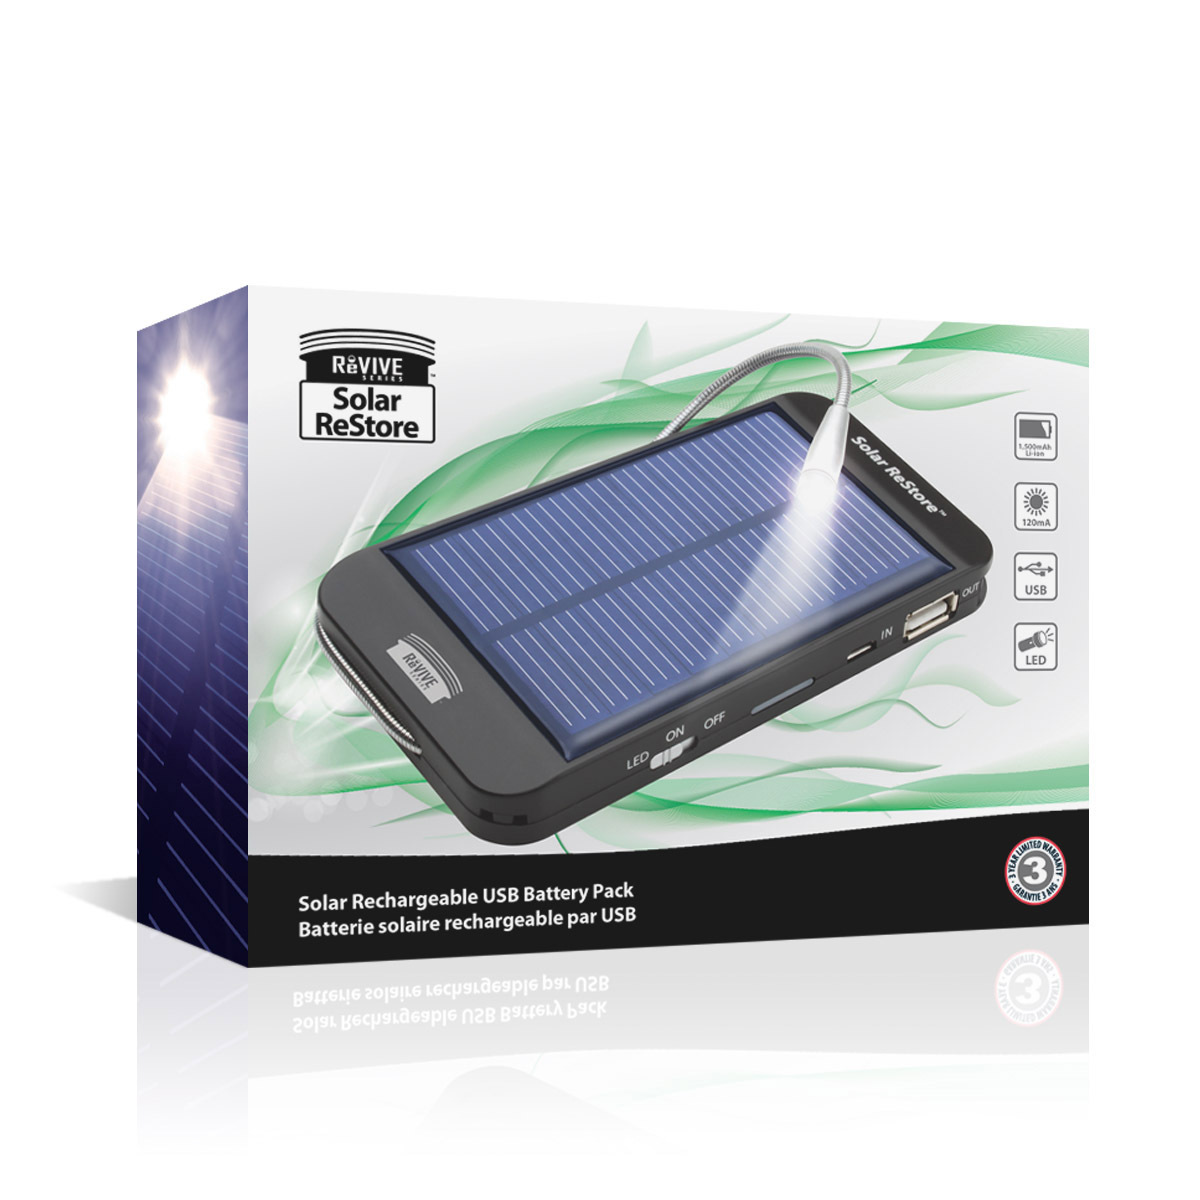 ReVIVE Solar ReStore Solar Charger and External Battery Pack with 